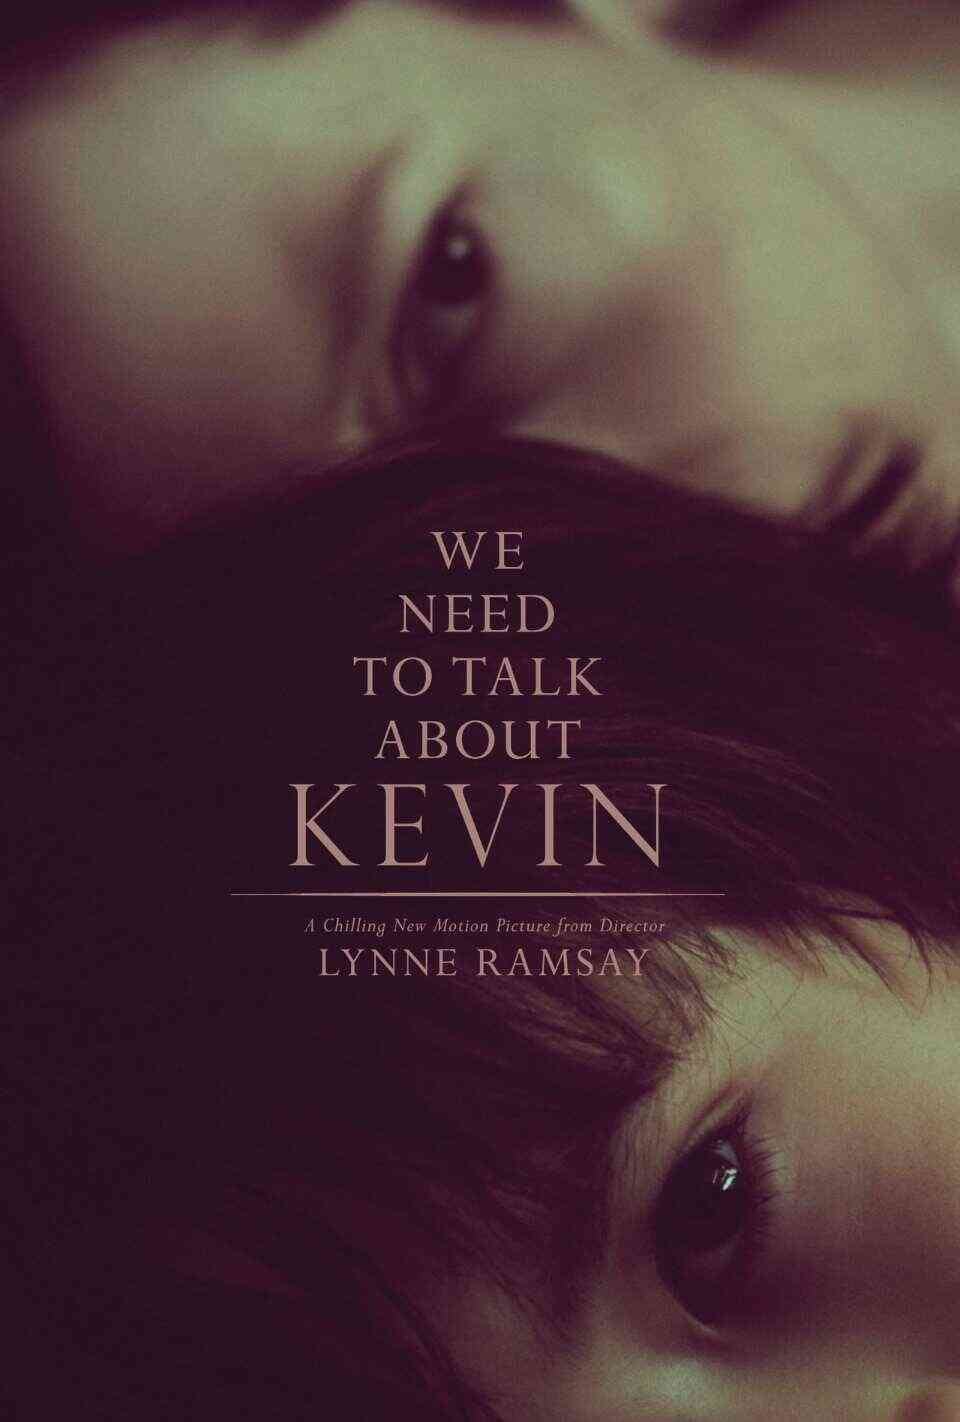 Read We Need to Talk About Kevin screenplay (poster)